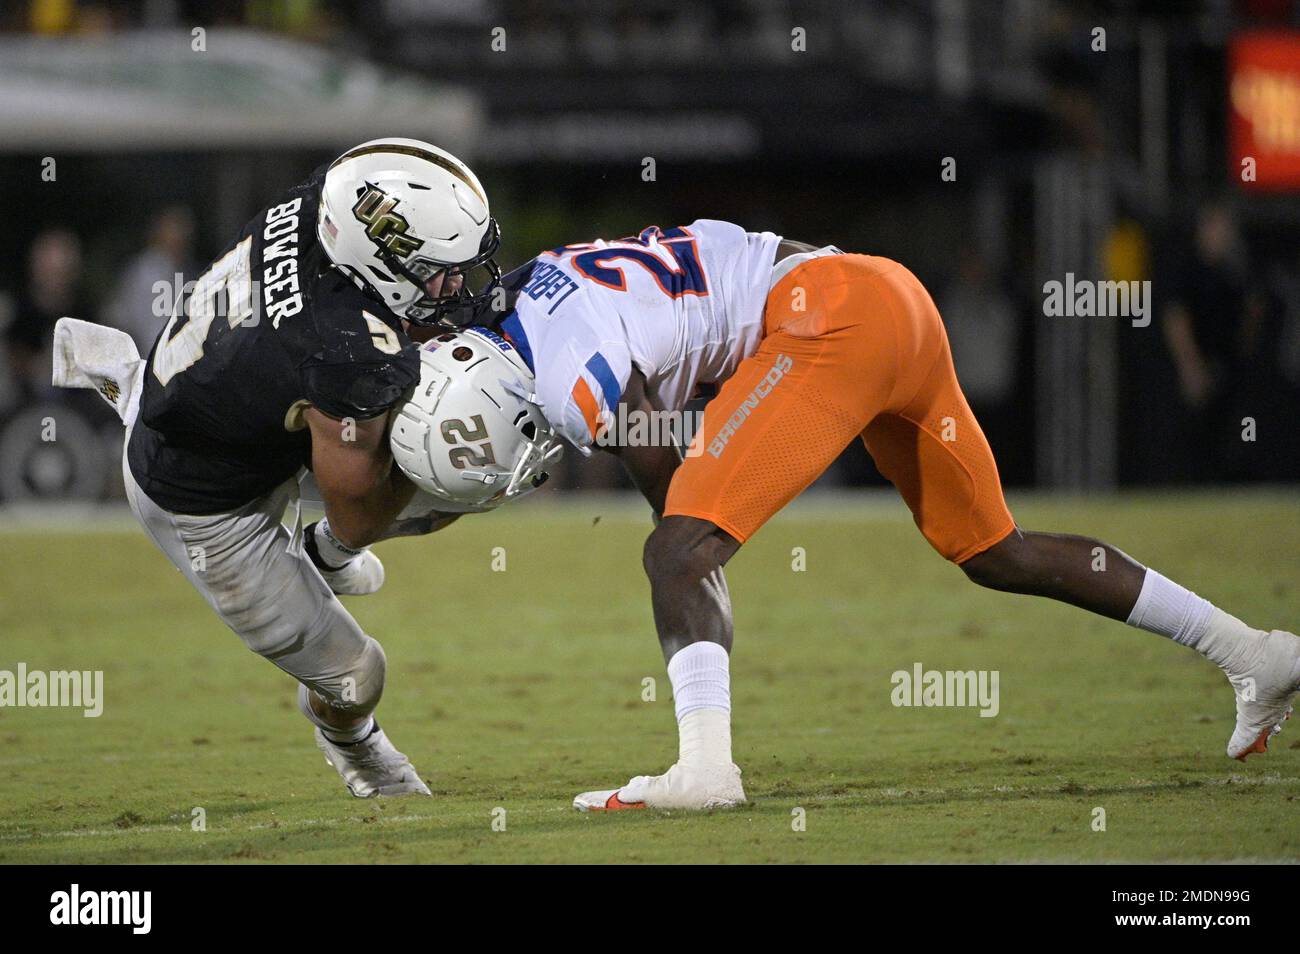 Central Florida running back Isaiah Bowser (5) is tackled by Boise State  cornerback Tyric LeBeauf (22) after catching a pass during the second half  of an NCAA college football game on Thursday,